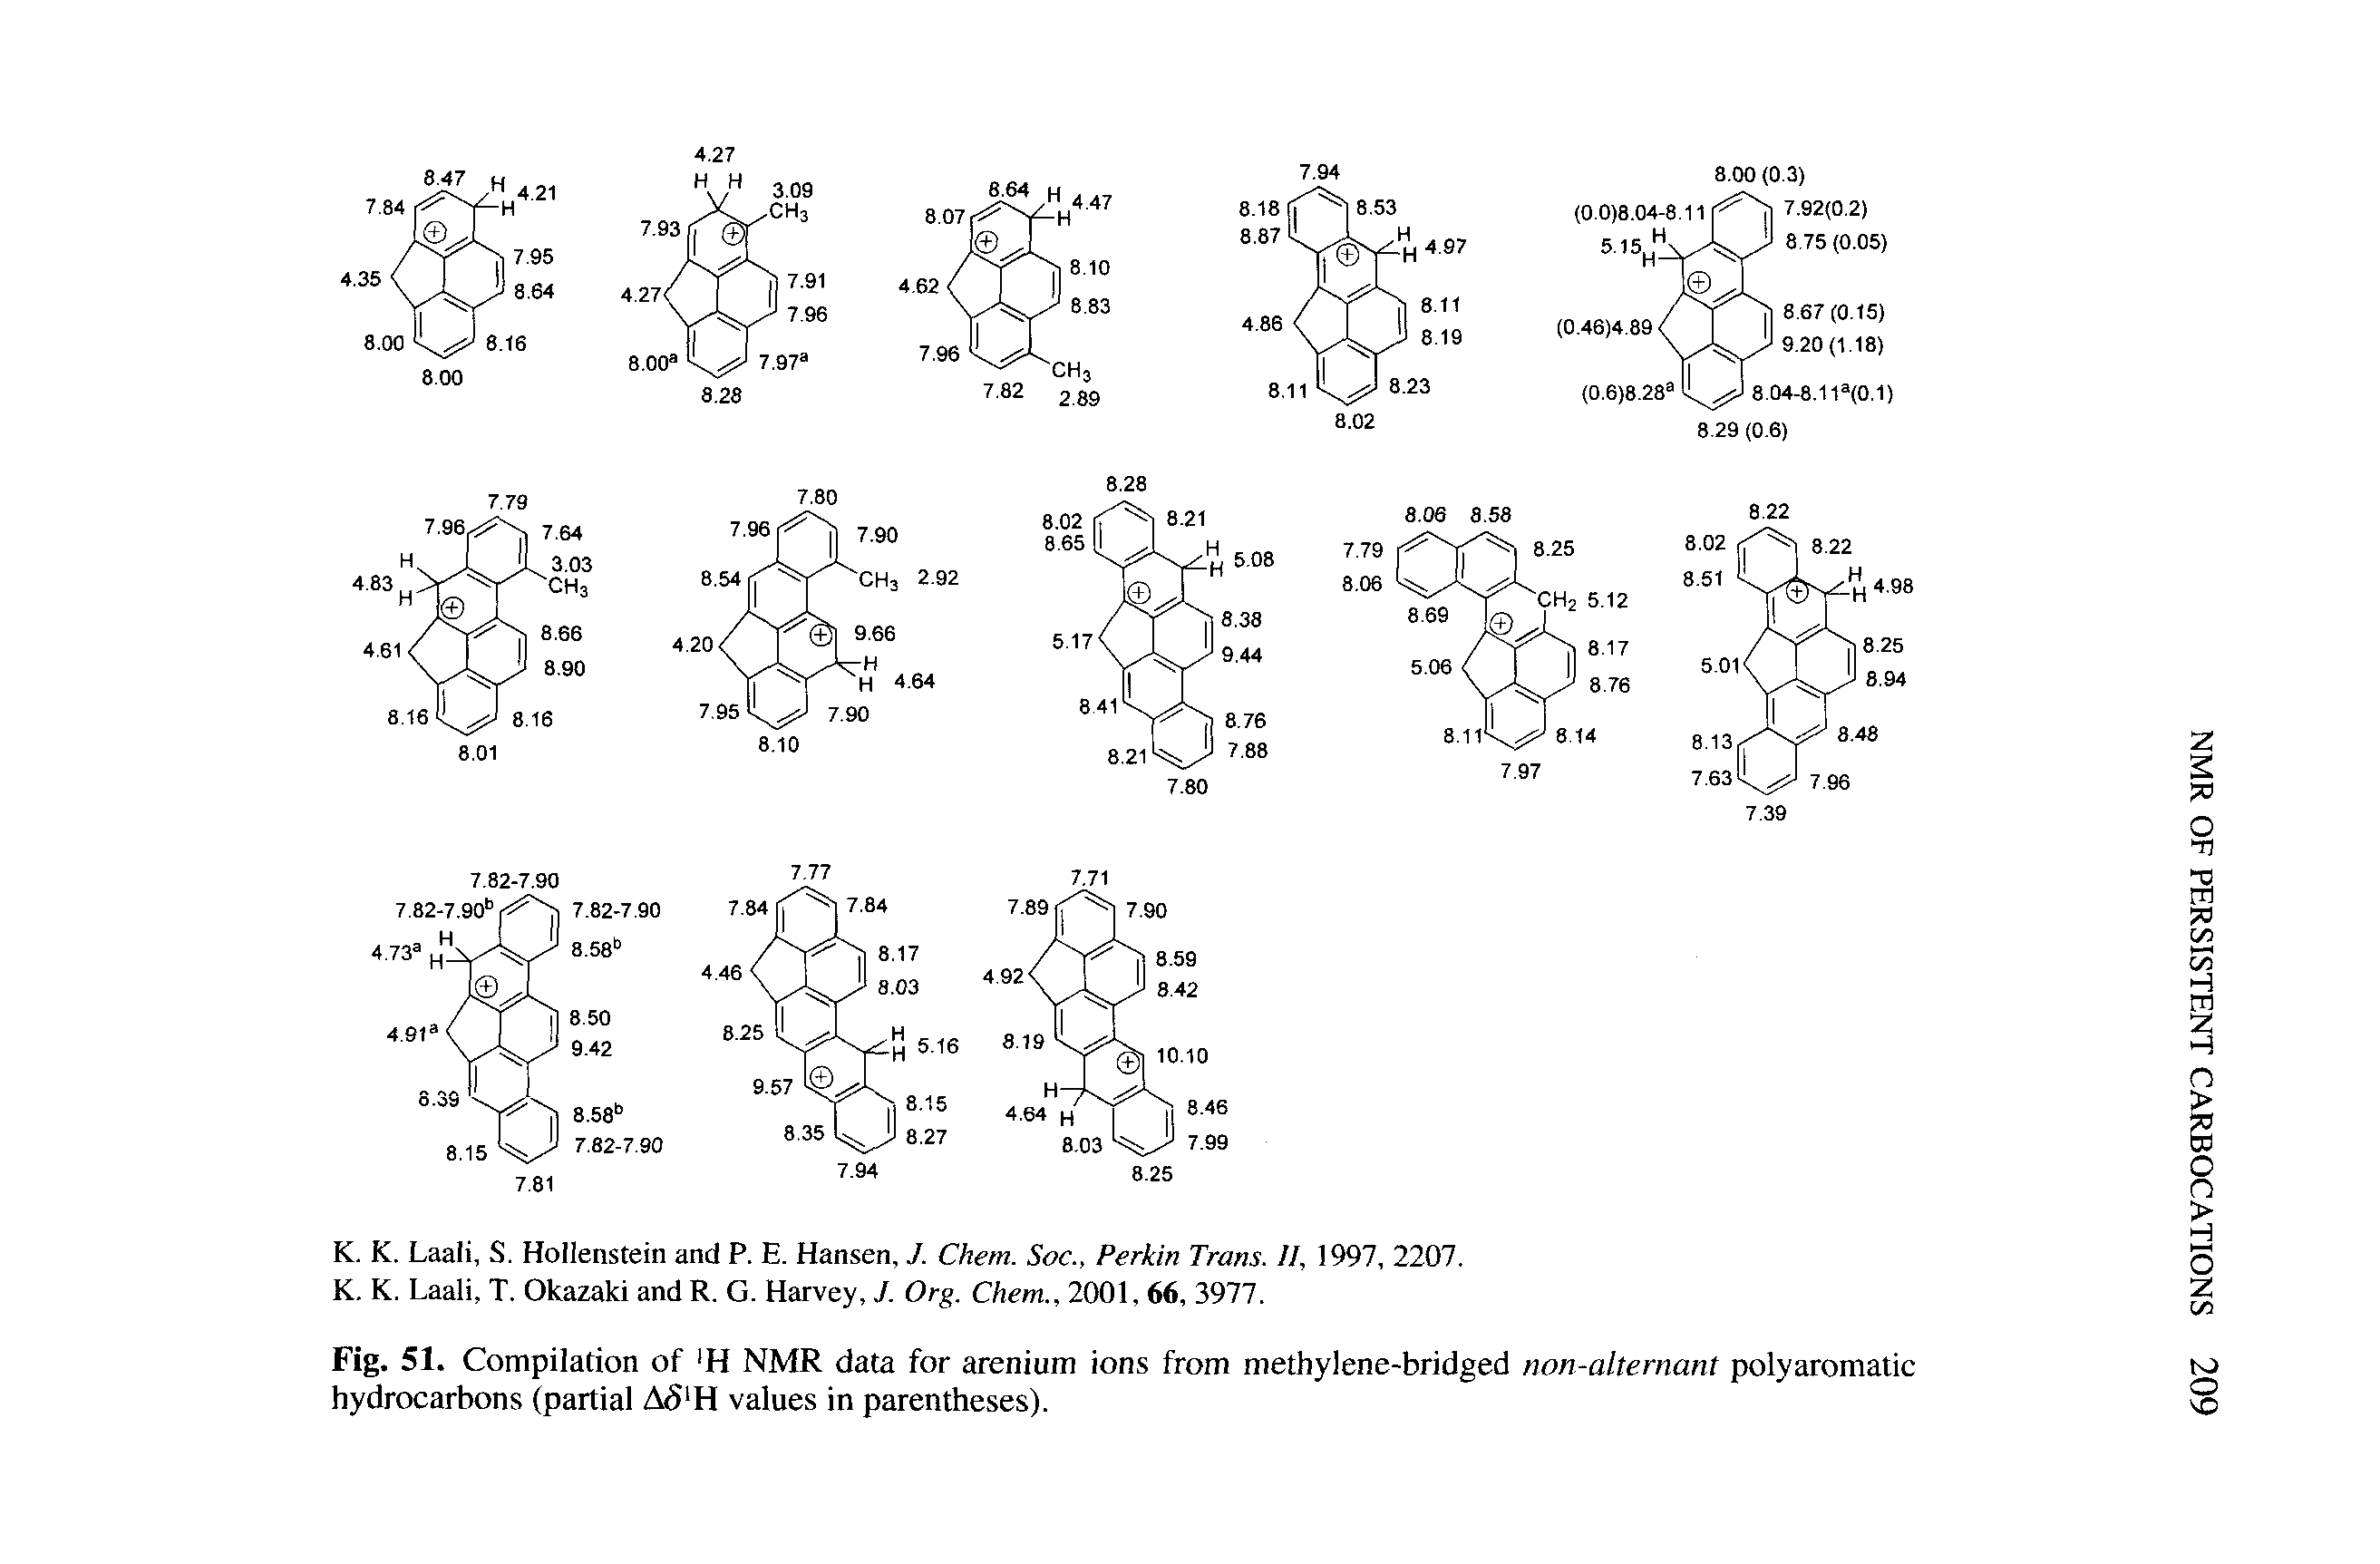 Fig. 51. Compilation of H NMR data for arenium ions from methylene-bridged non-alternant polyaromatic hydrocarbons (partial A<5lH values in parentheses).